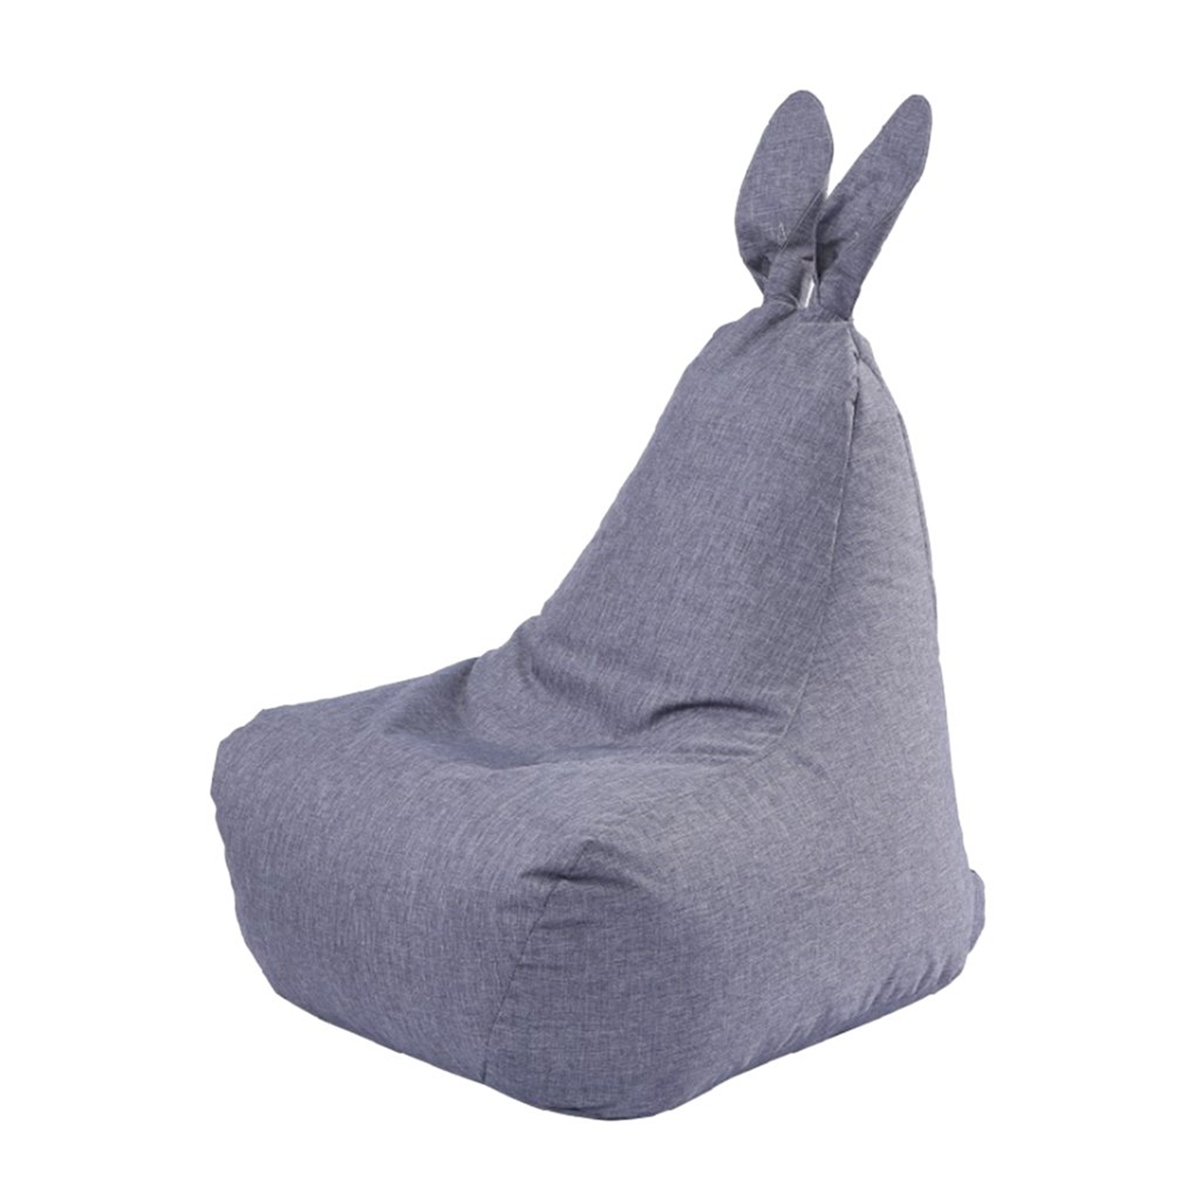 Rabbit-Shape-Bean-Bag-Chair-Seat-Sofa-Cover-For-Adults-Kids-Without-Filling-Home-Room-1566395-9